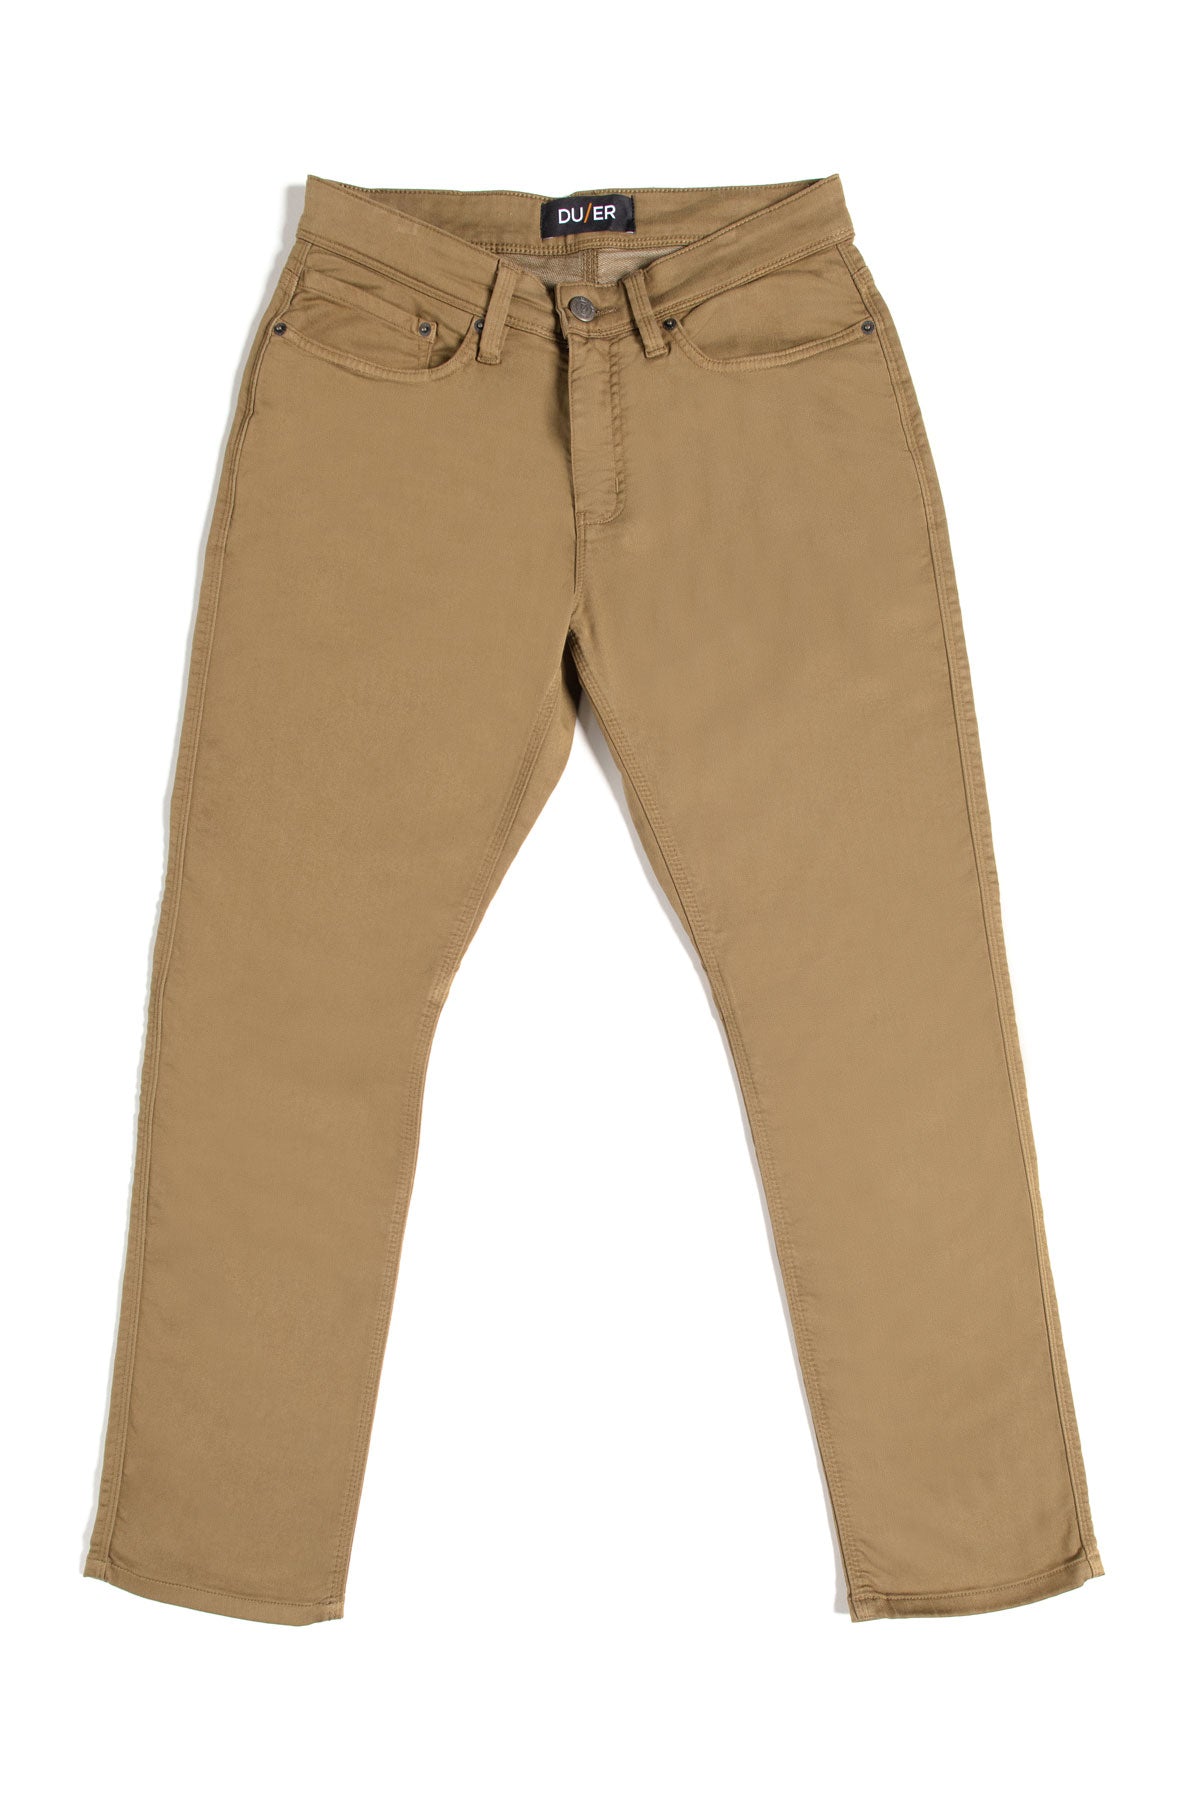 No Sweat Relaxed Pant - Tobacco Brown